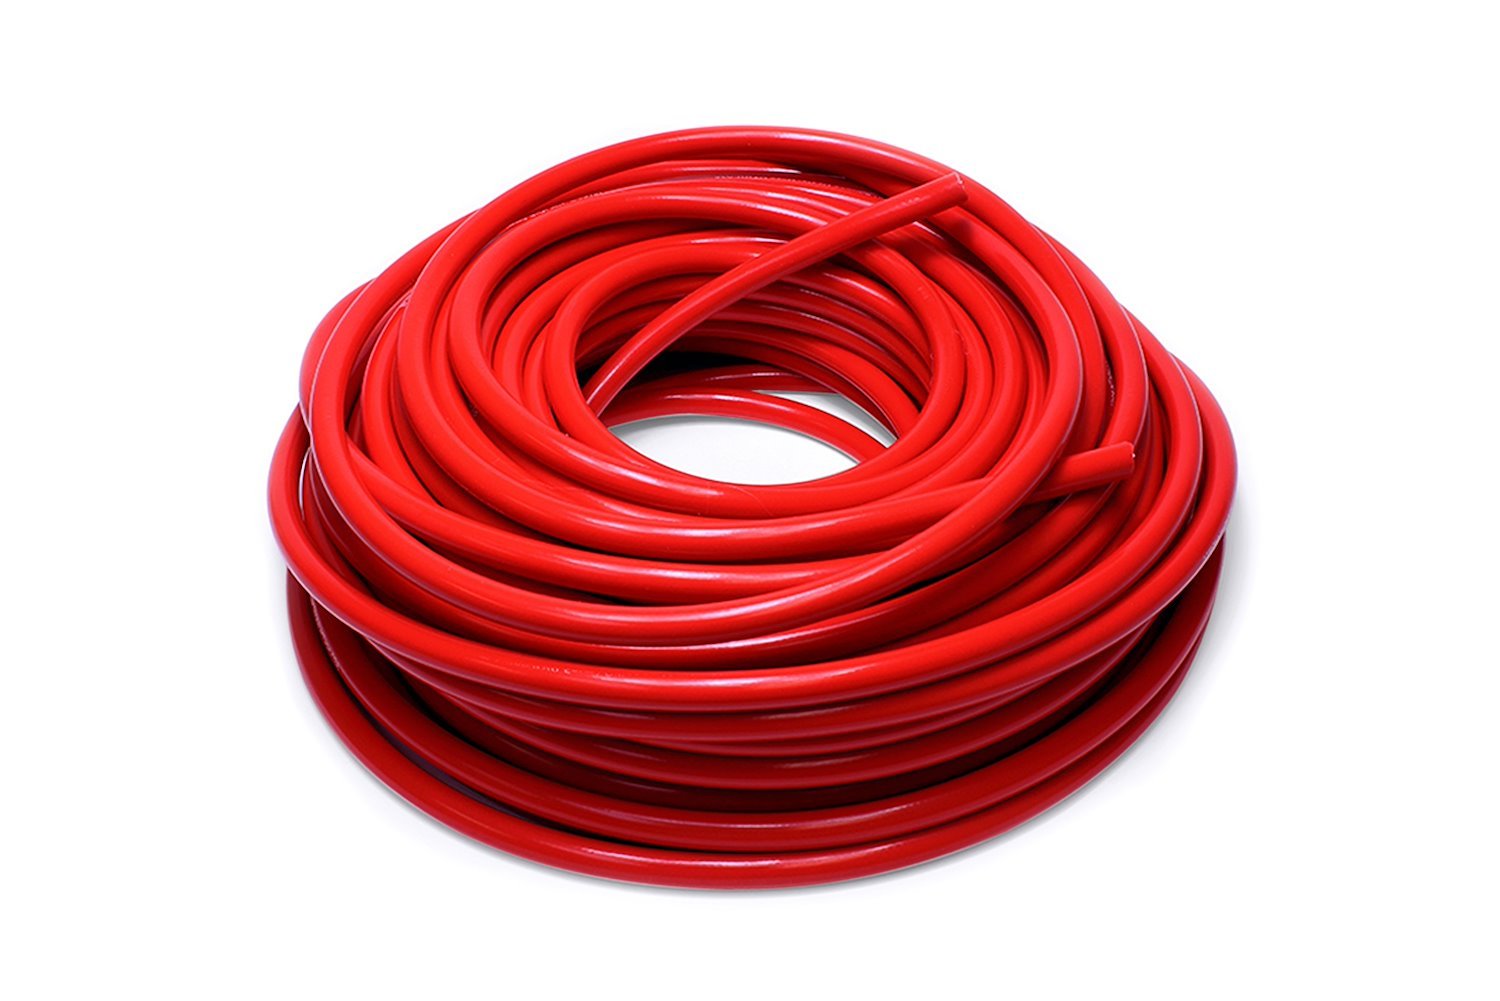 HTHH-013-REDx100 Silicone Heater Hose Tubing, High-Temp Reinforced, 1/8 in. ID, 100 ft. Roll, Red